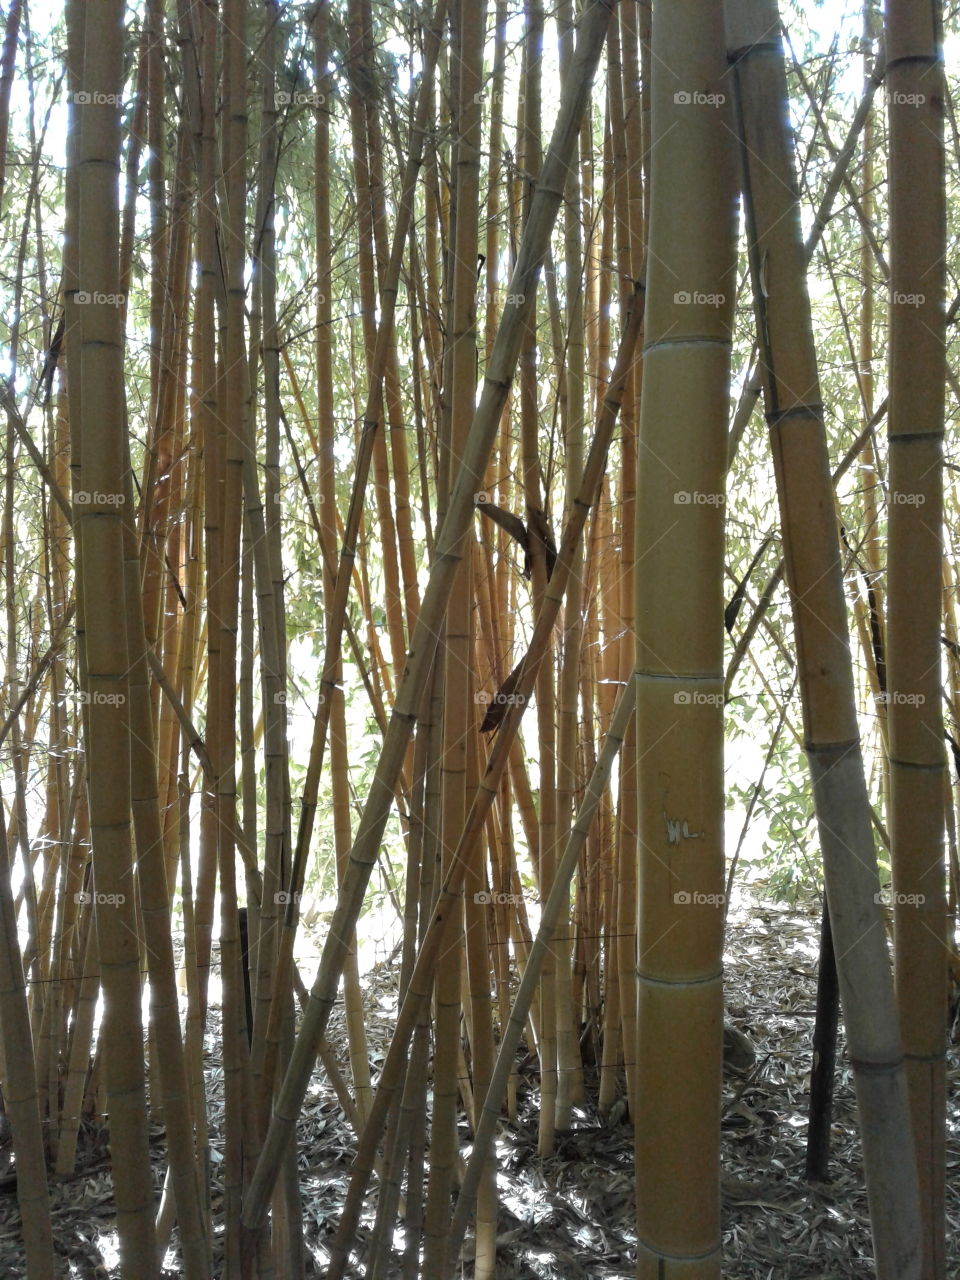 lovely bamboo forest